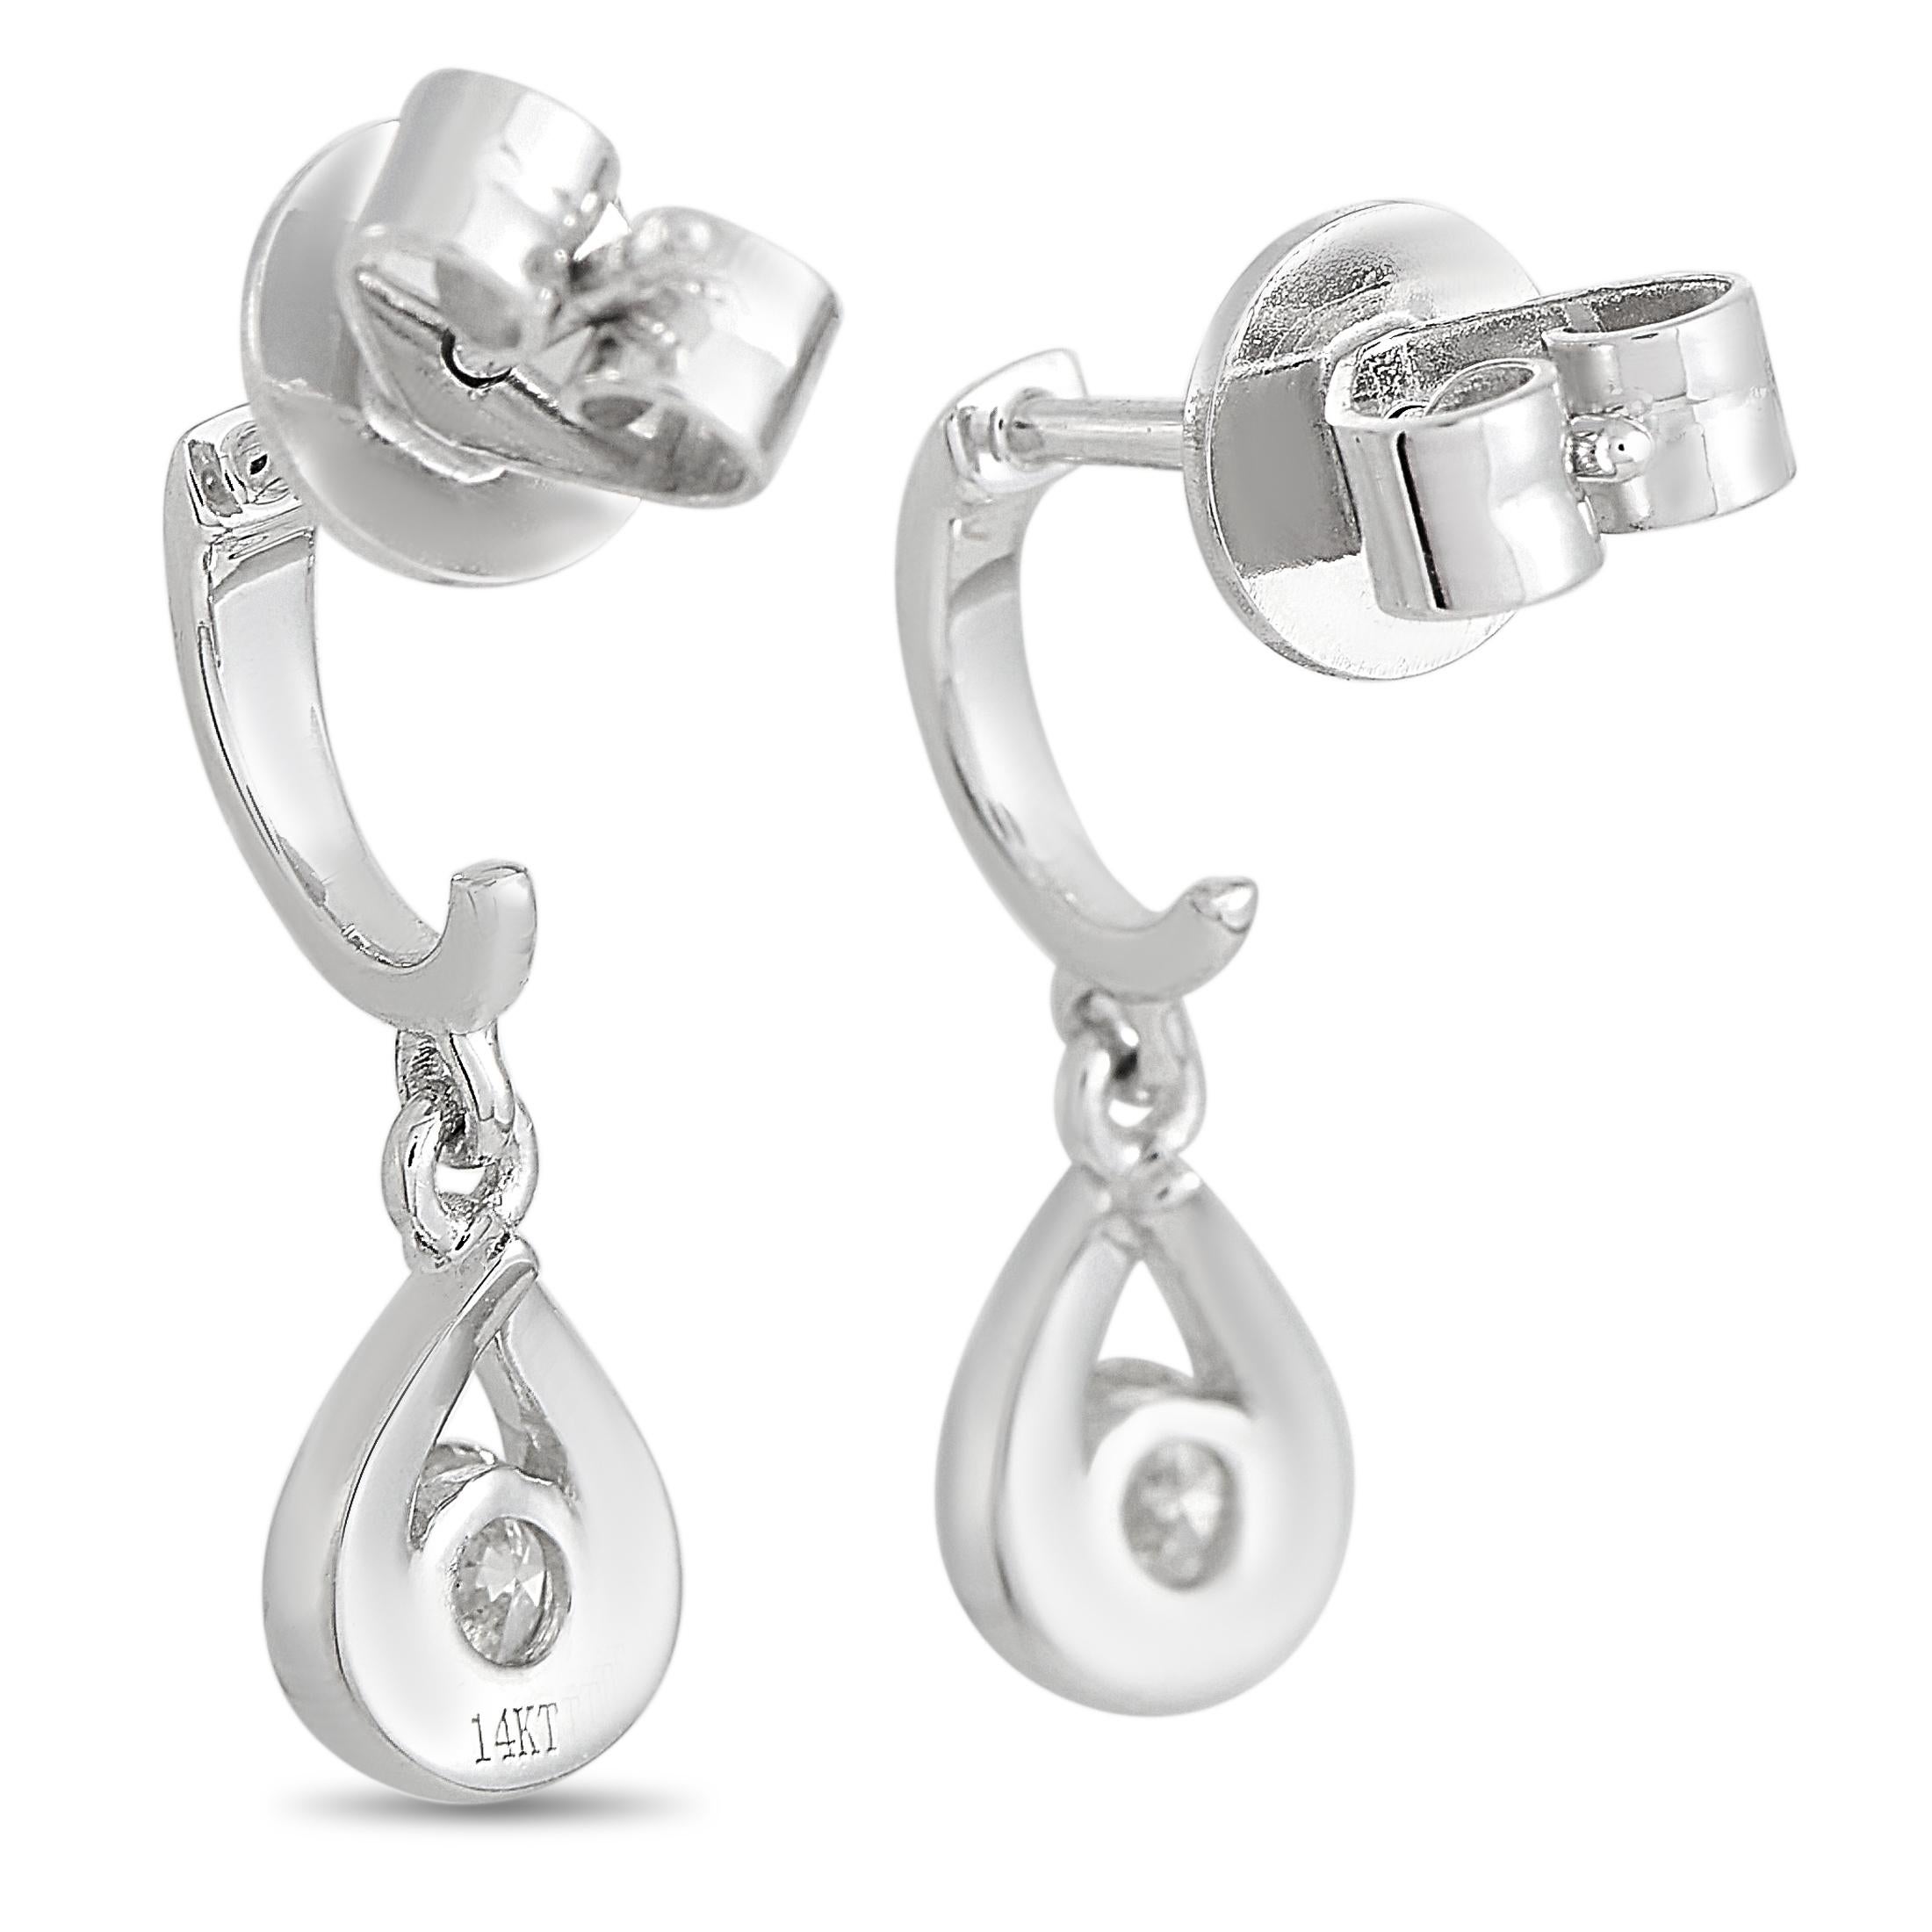 These LB Exclusive earrings are crafted from 14K white gold and each of the two weighs 0.95 grams. They measure 0.65” in length and 0.25” in width. The pair is set with diamonds that total 0.20 carats.
 
 The earrings are offered in brand new